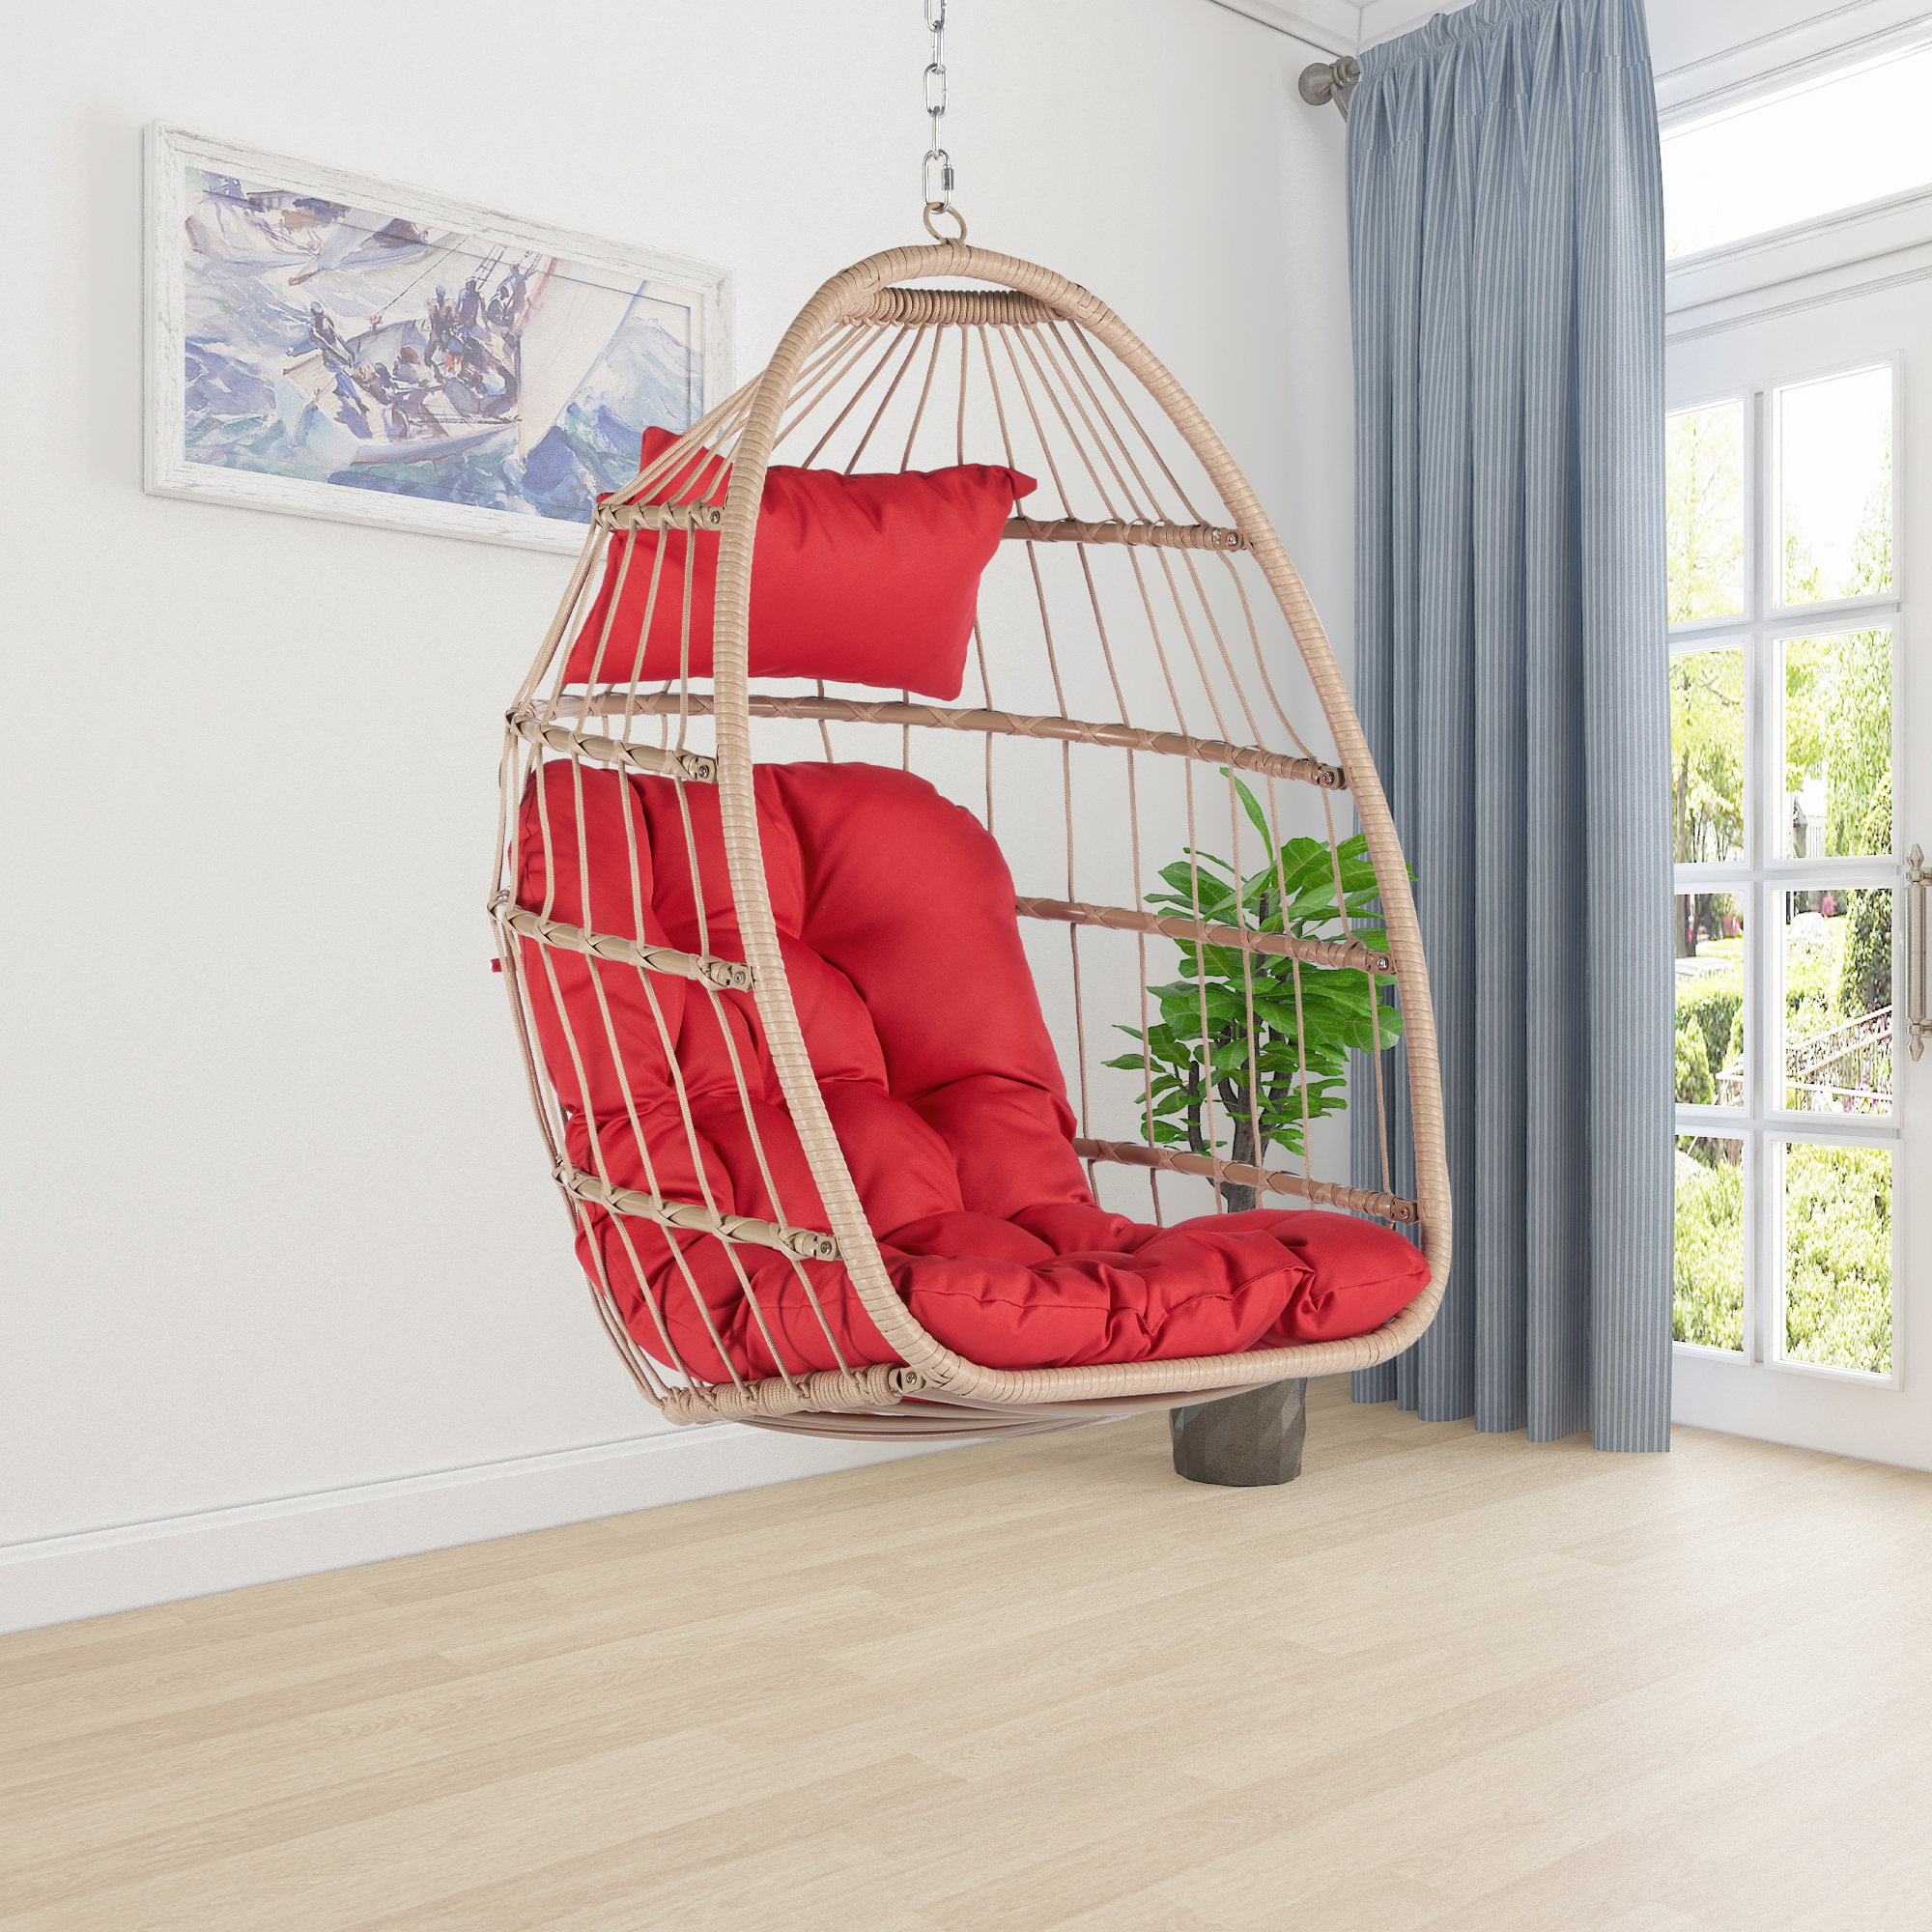 Hanging Egg Chair, Indoor Outdoor Swing Egg Chair Without Stand, Wicker Hammock Chair Swing with Cushion & Hanging Chain, Hanging Lounge Chair for Patio Backyard Balcony Garden Bedroom - image 3 of 9